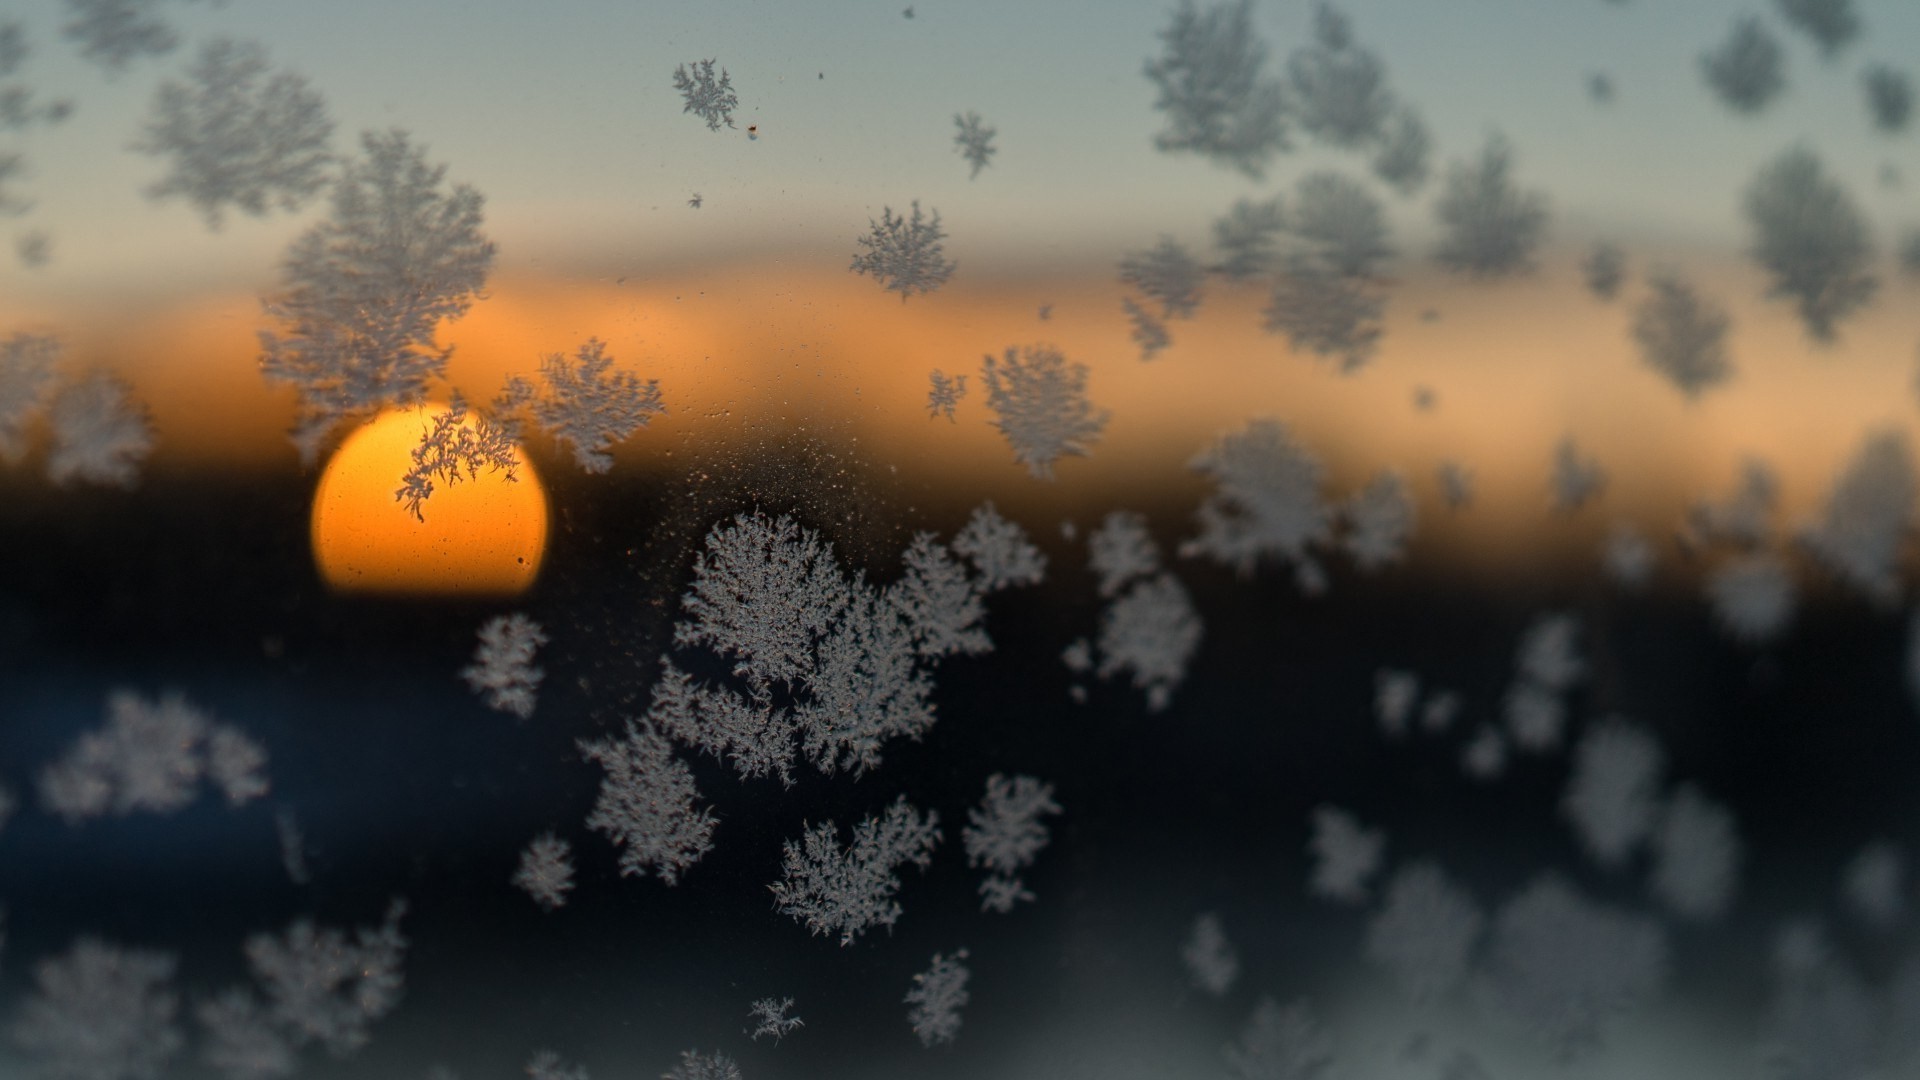 nature, Sun, Sunset, Glass, Winter, Snow, Snow Flakes, Depth Of Field, Clouds, Blurred, Frost, Photography Wallpaper